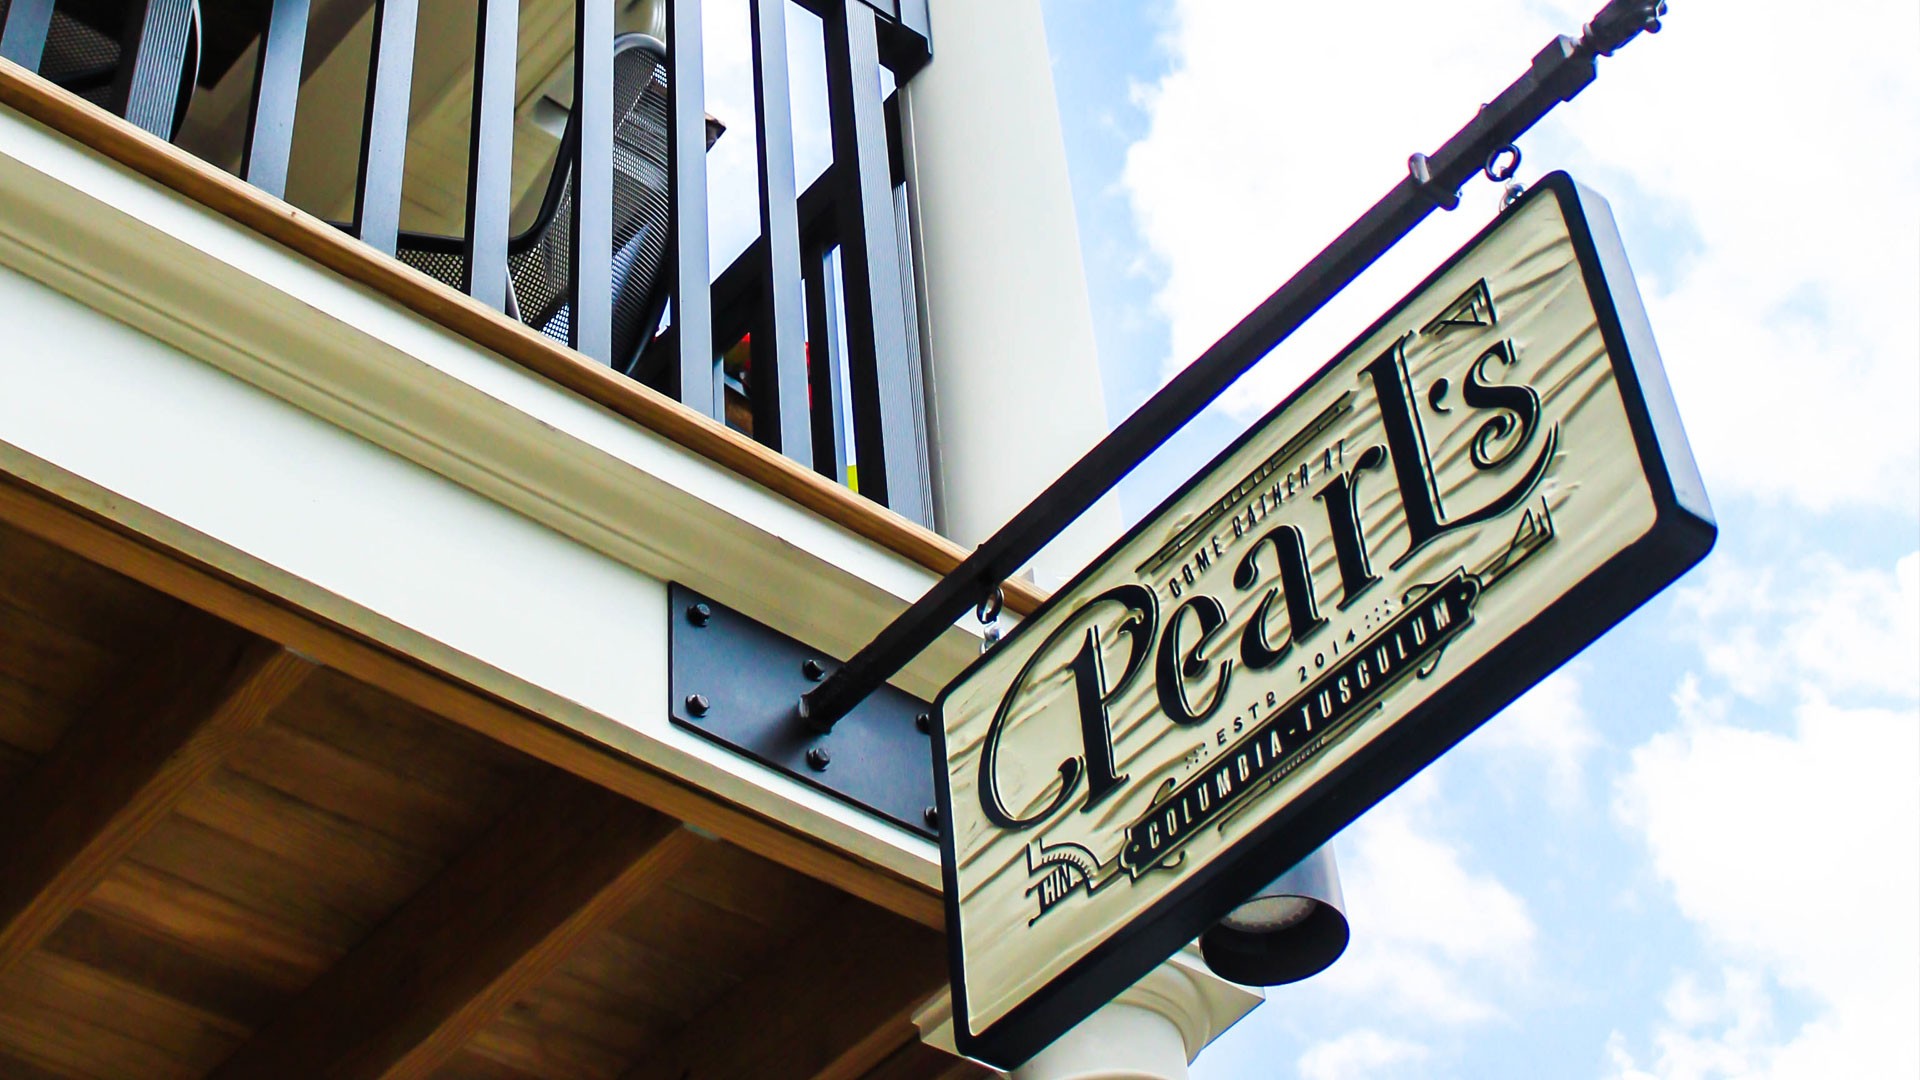 Pearls---small-exterior-sign